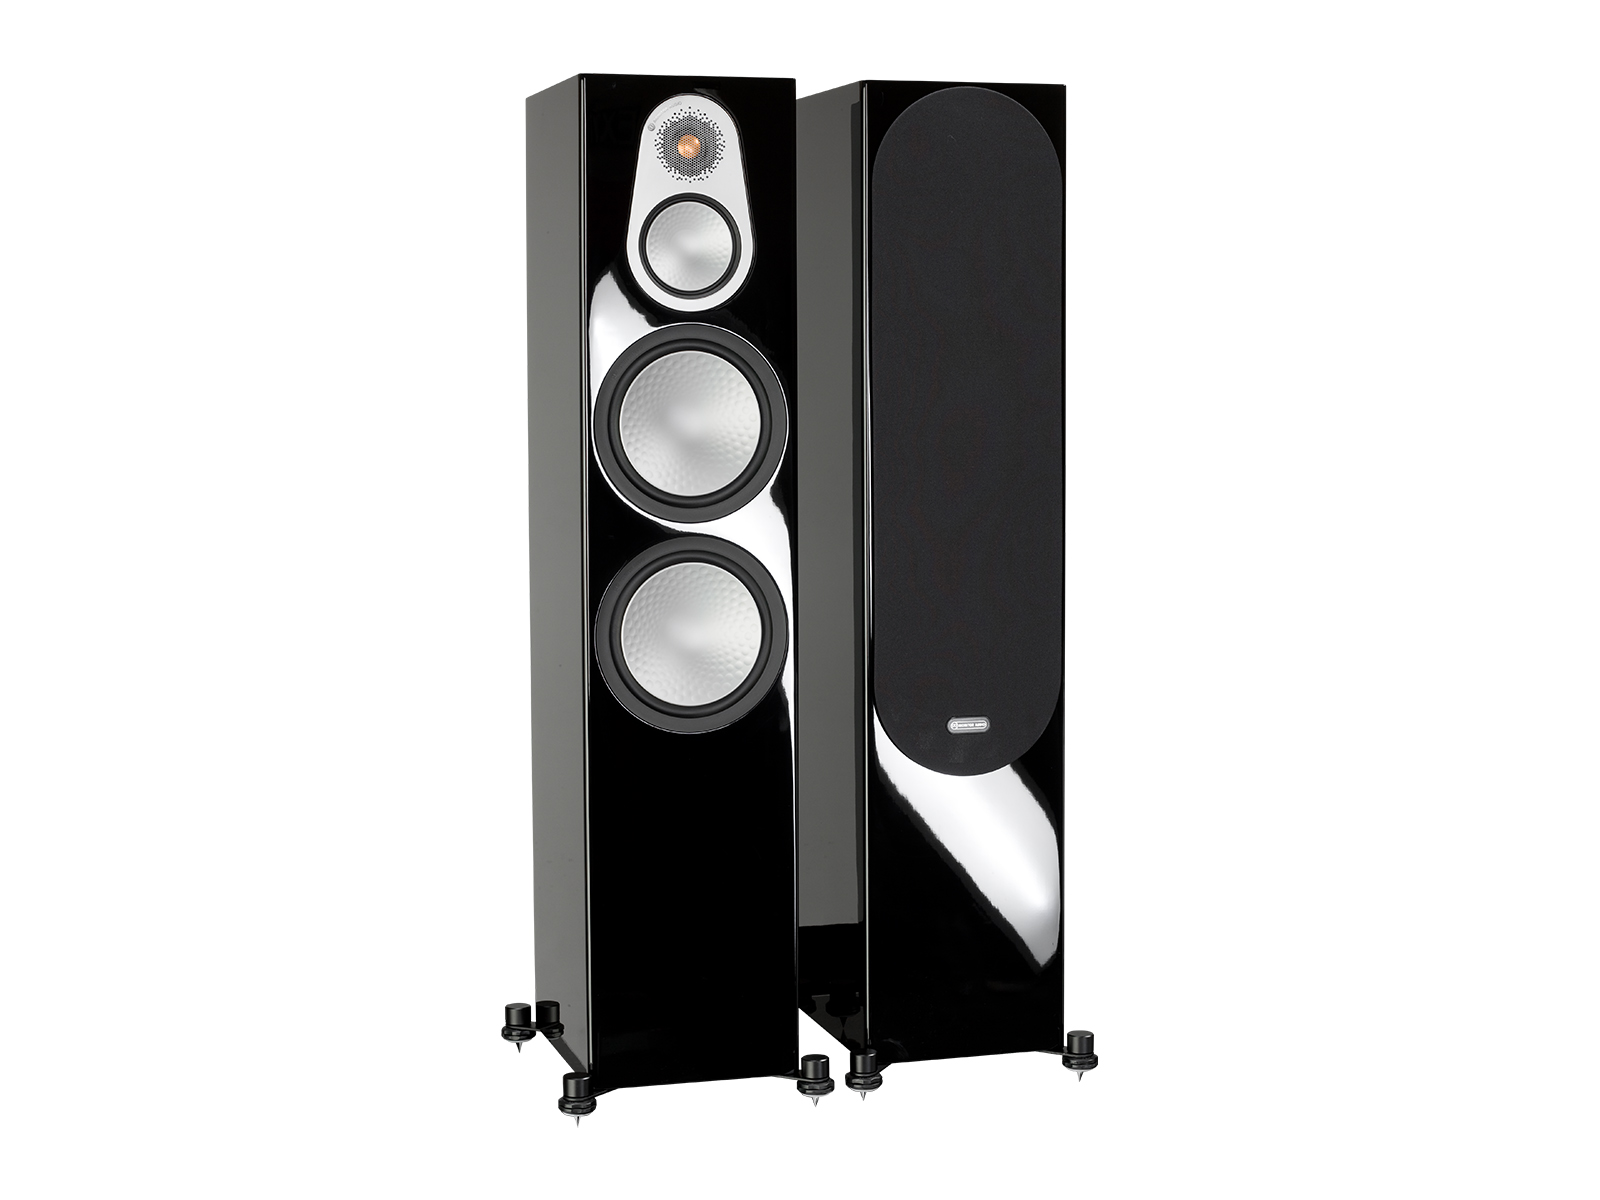 Silver 500, floorstanding speakers, with and without grille in a high gloss black finish.